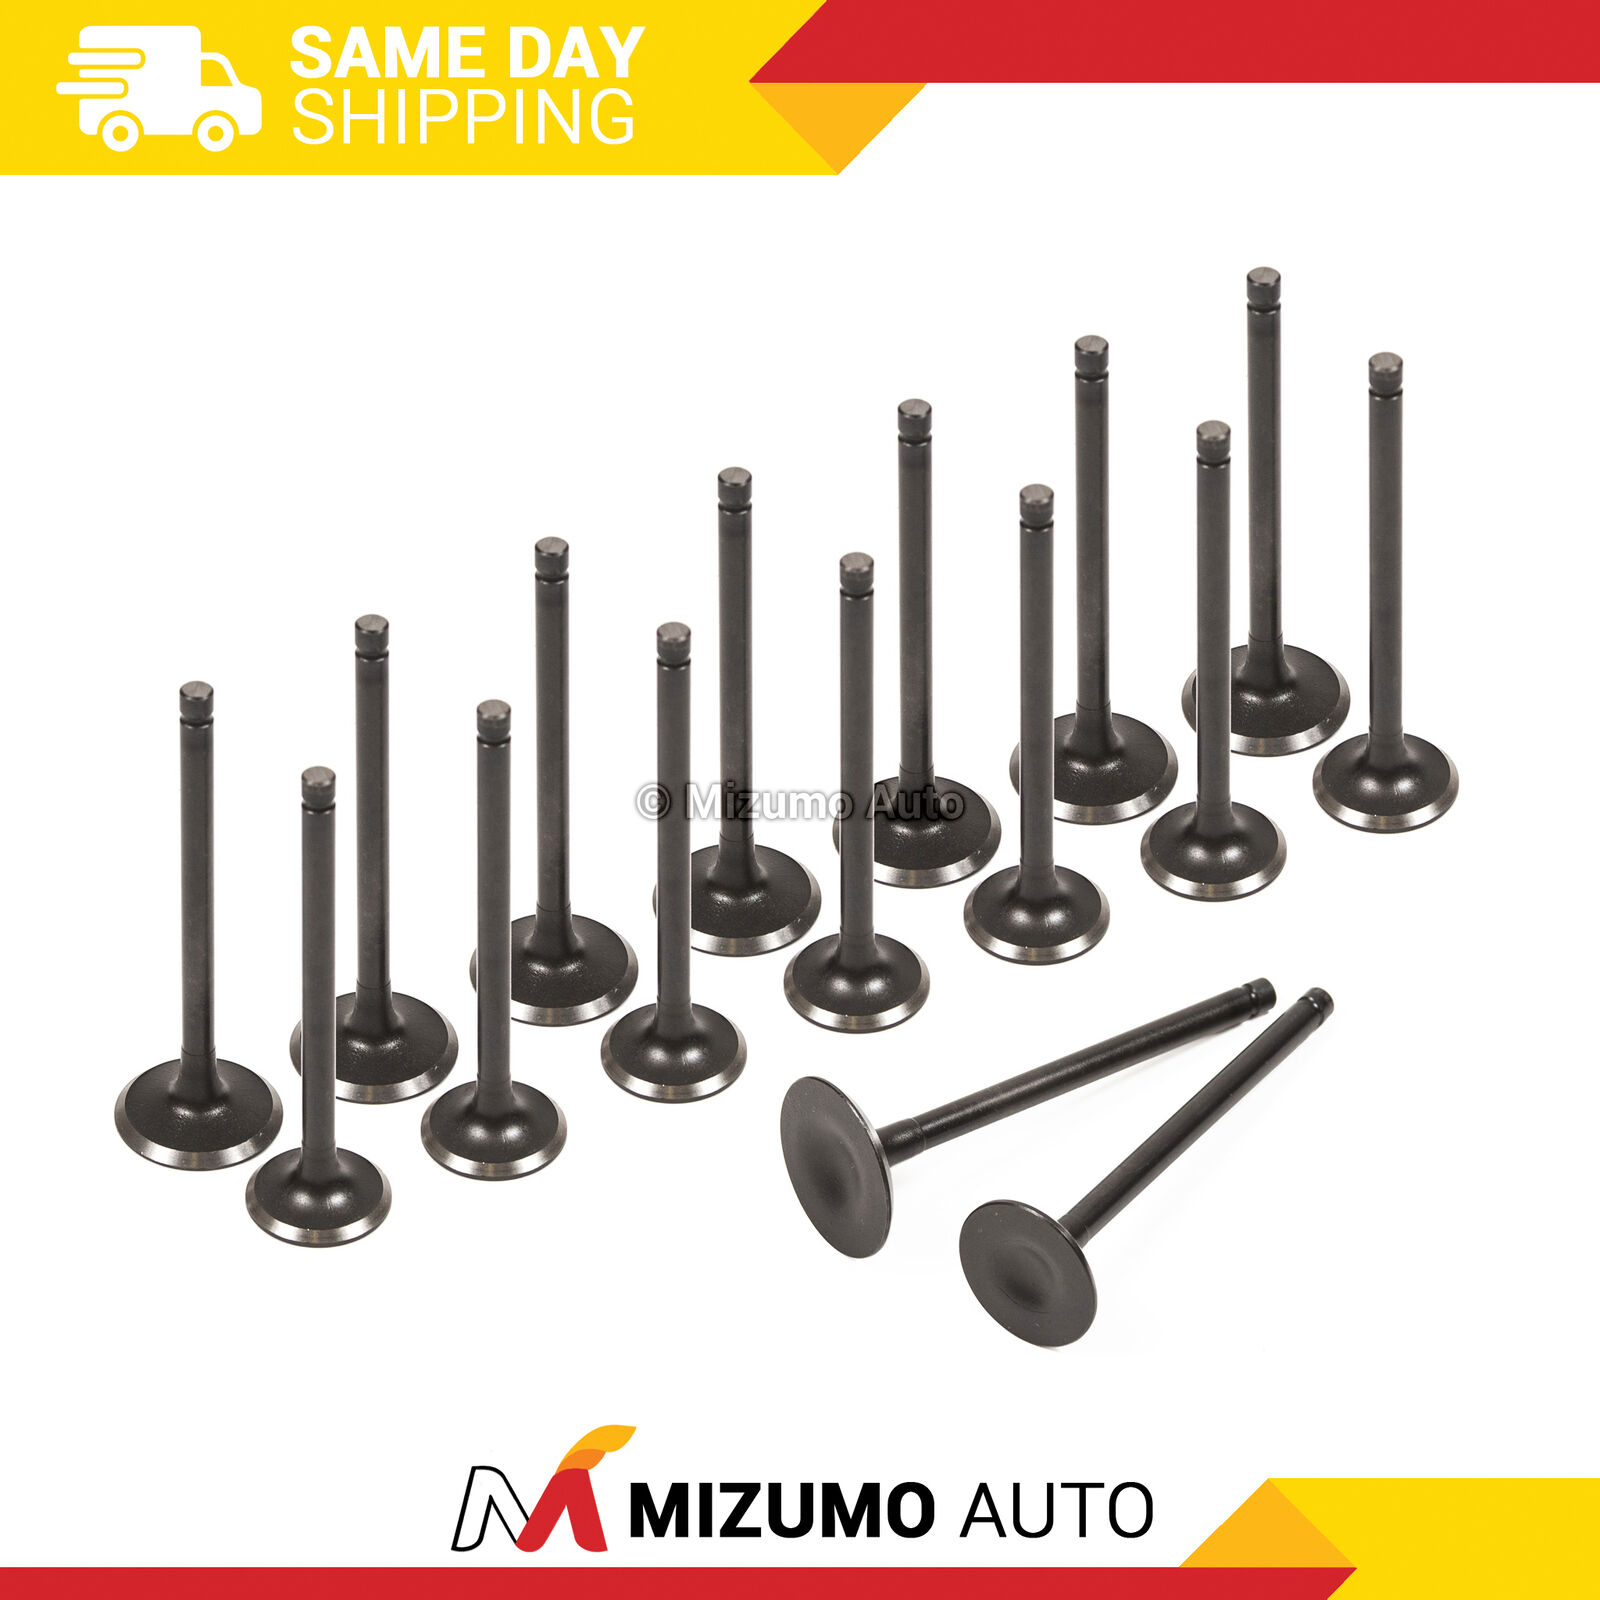 Intake Exhaust Valves Fit 94-02 Honda Accord Odyssey Acura CL F22B1 F23A1 F23A4